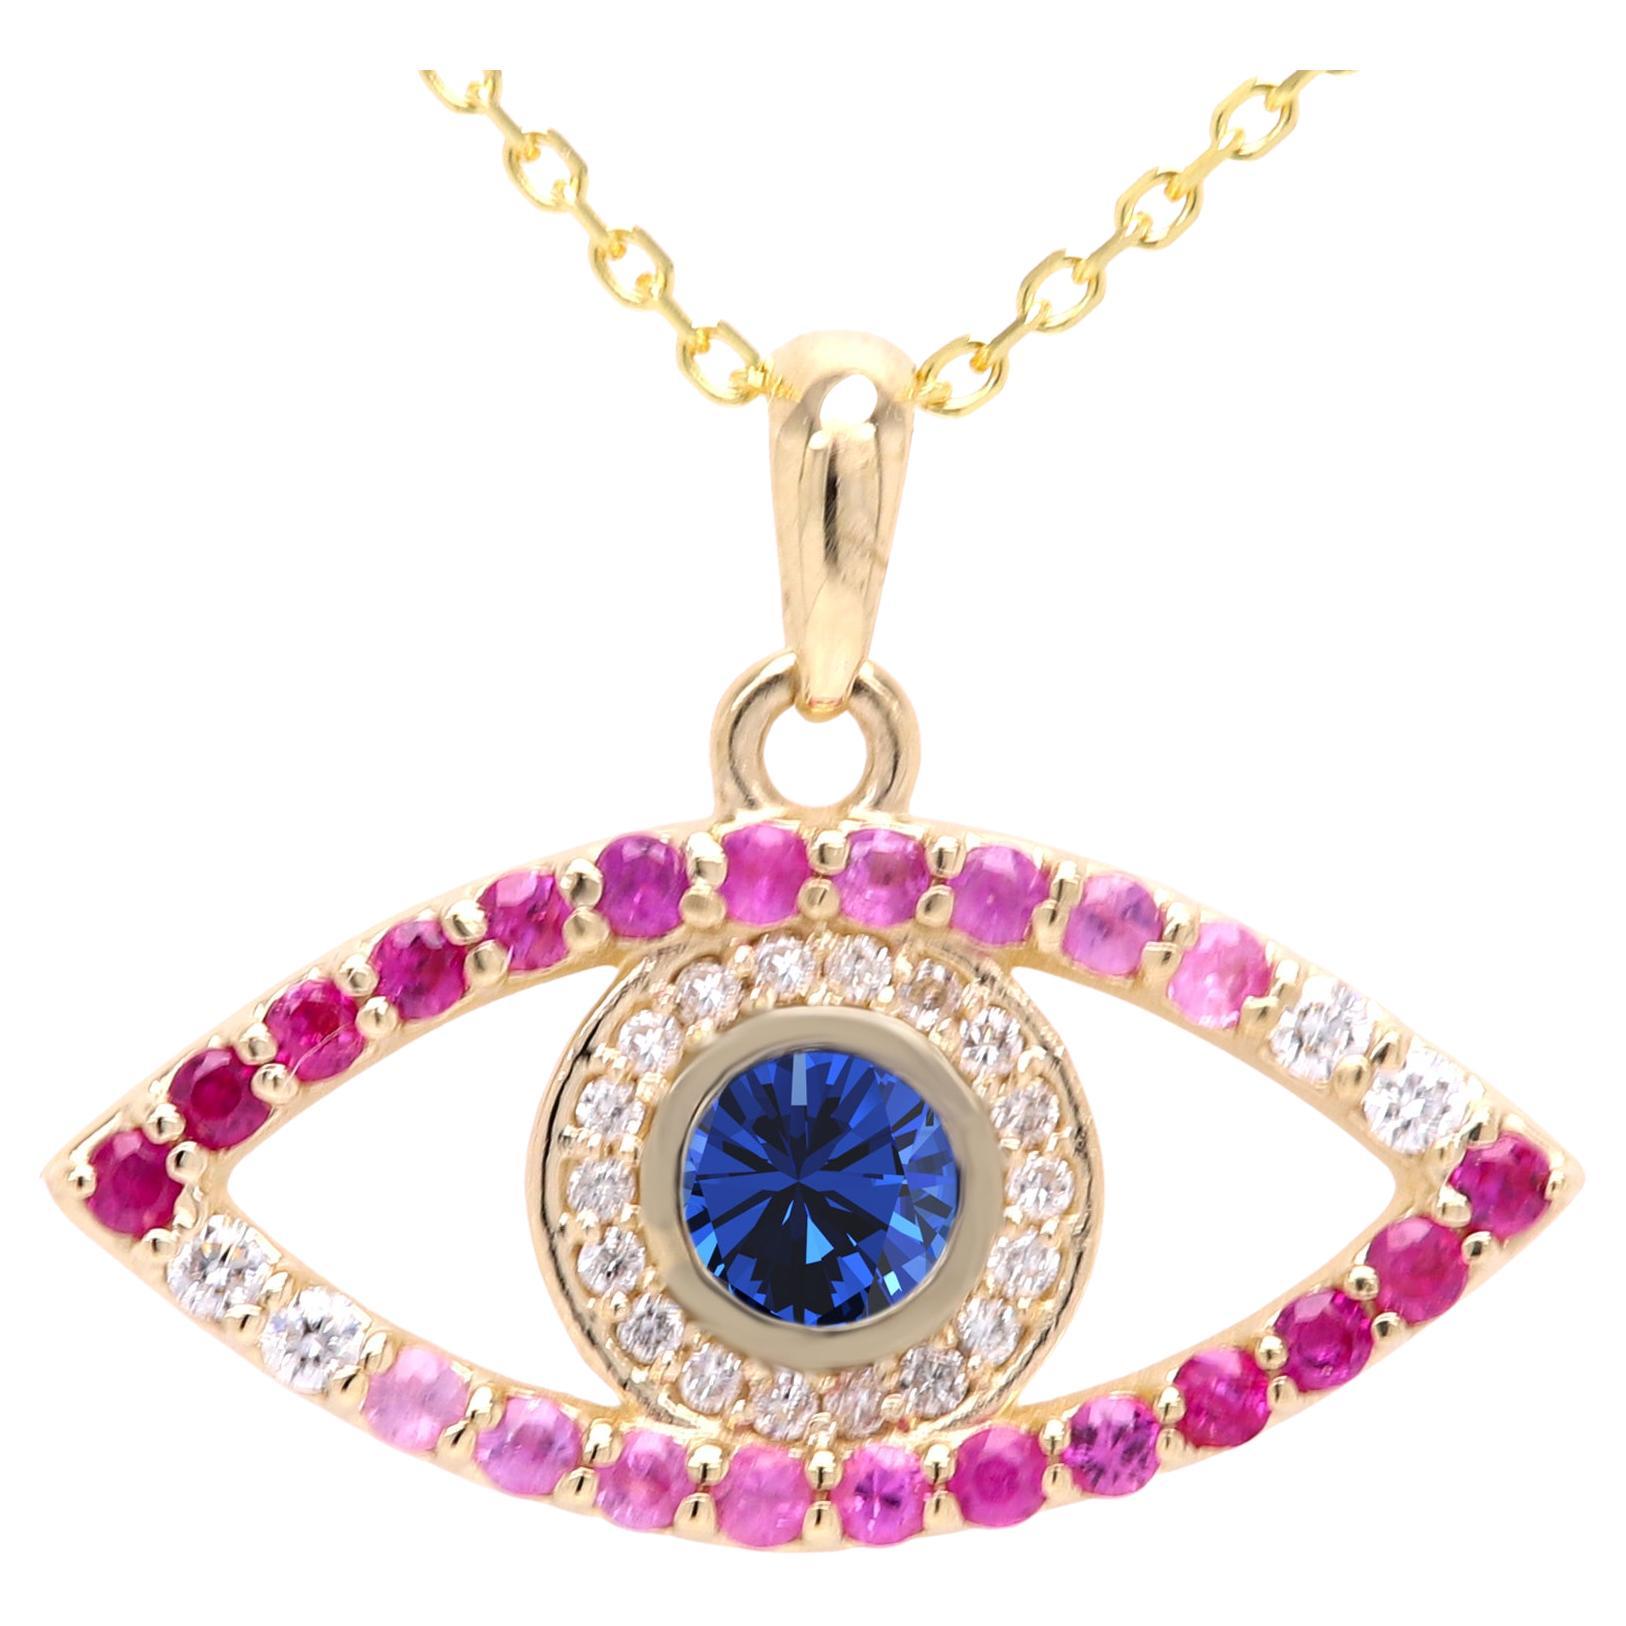 Louis Vuitton Pink Sapphire Diamond Necklace - For Sale on 1stDibs  louis  vuitton high jewelry pink sapphire and diamond necklace, louis vuitton pink  sapphire and diamond necklace price